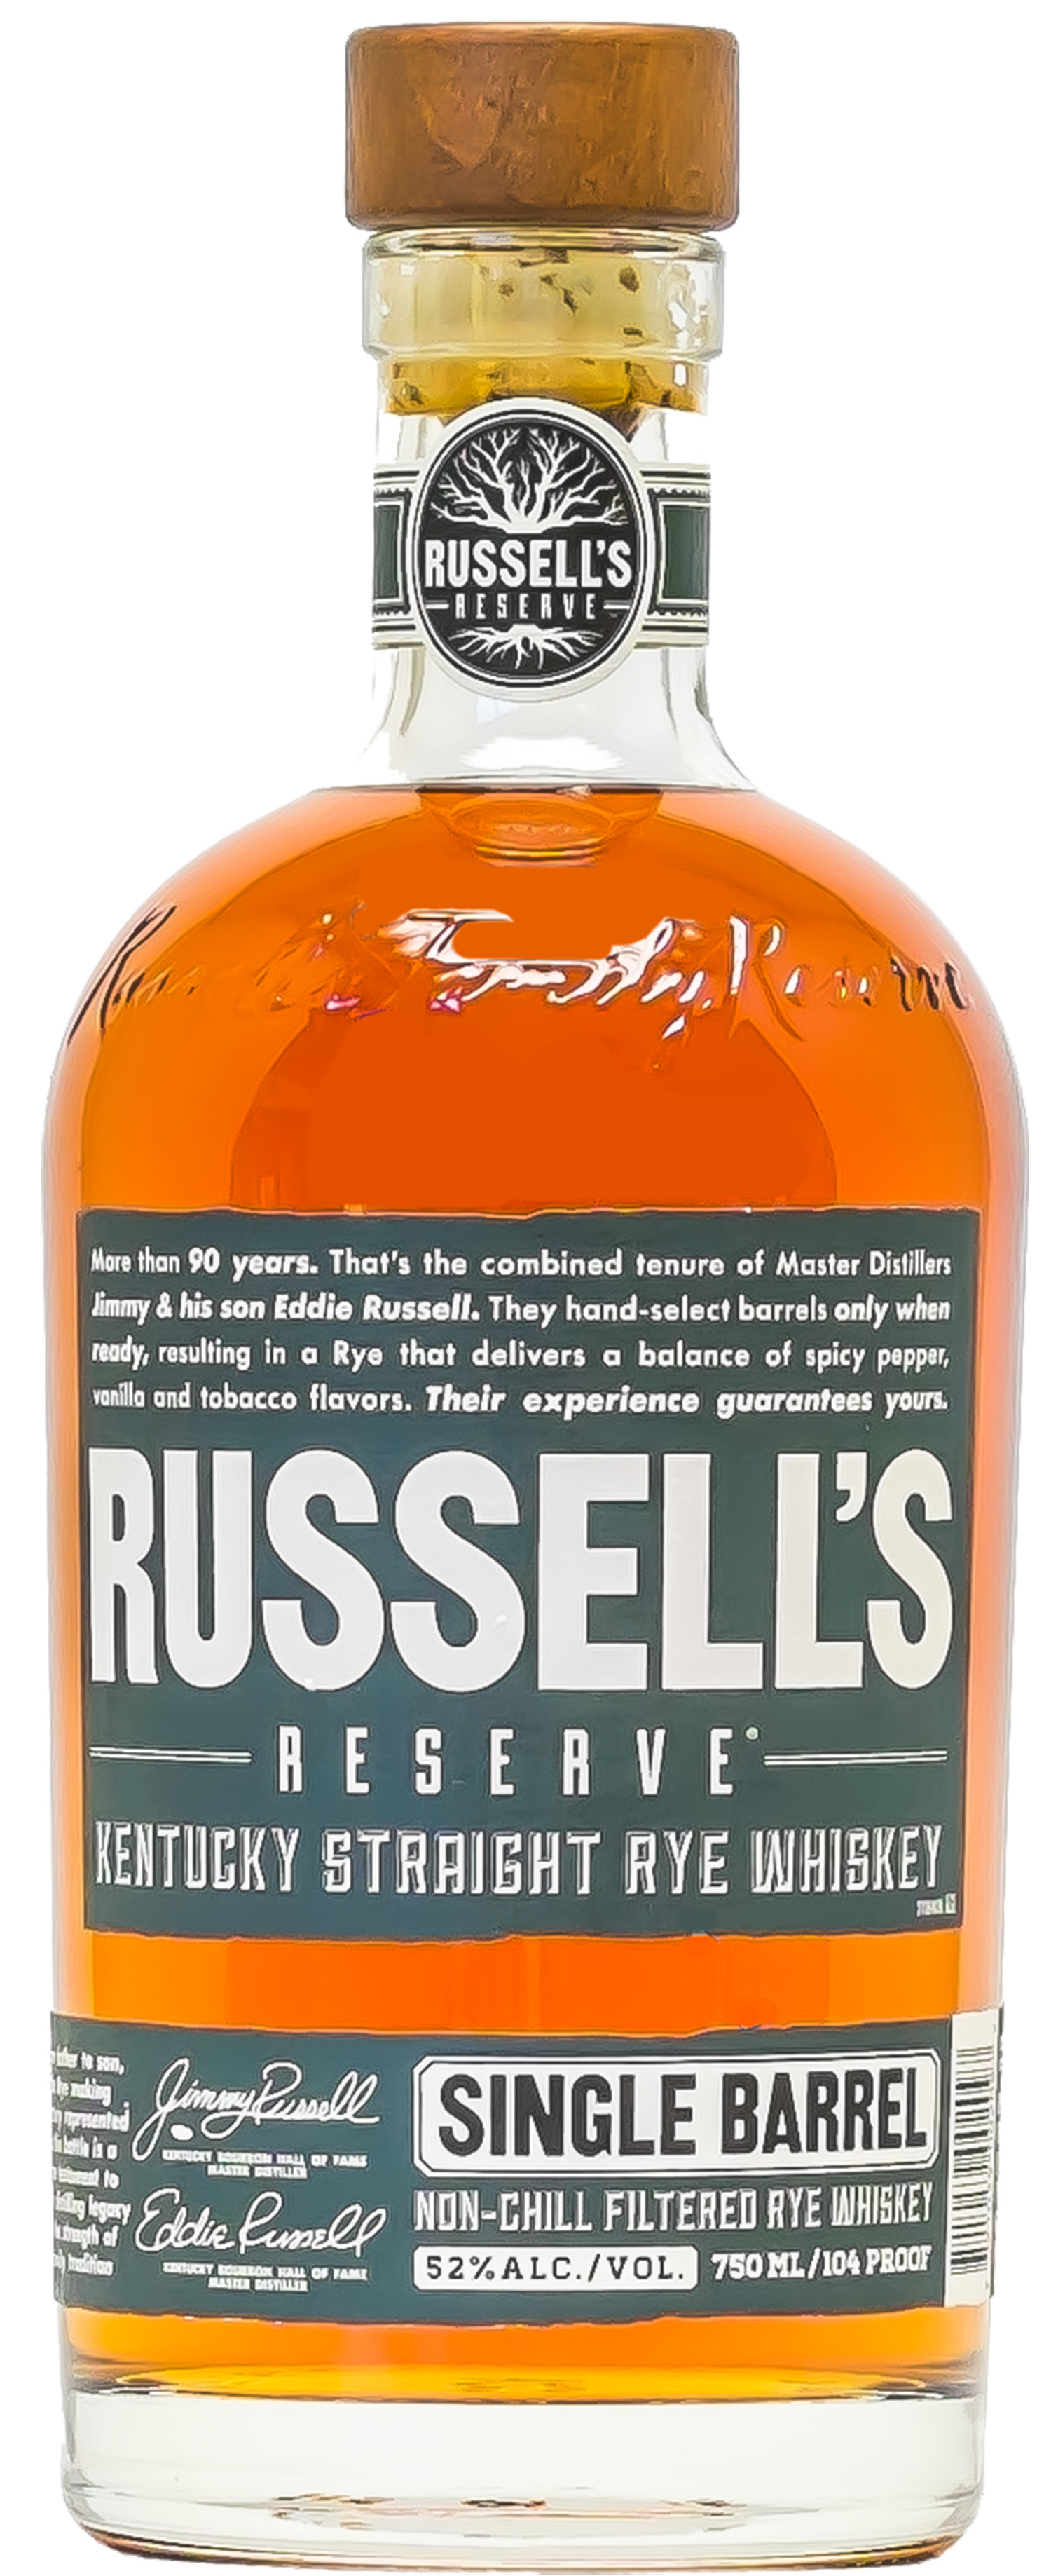 Russell’s Reserve Unveils Single Barrel Rye Whiskey